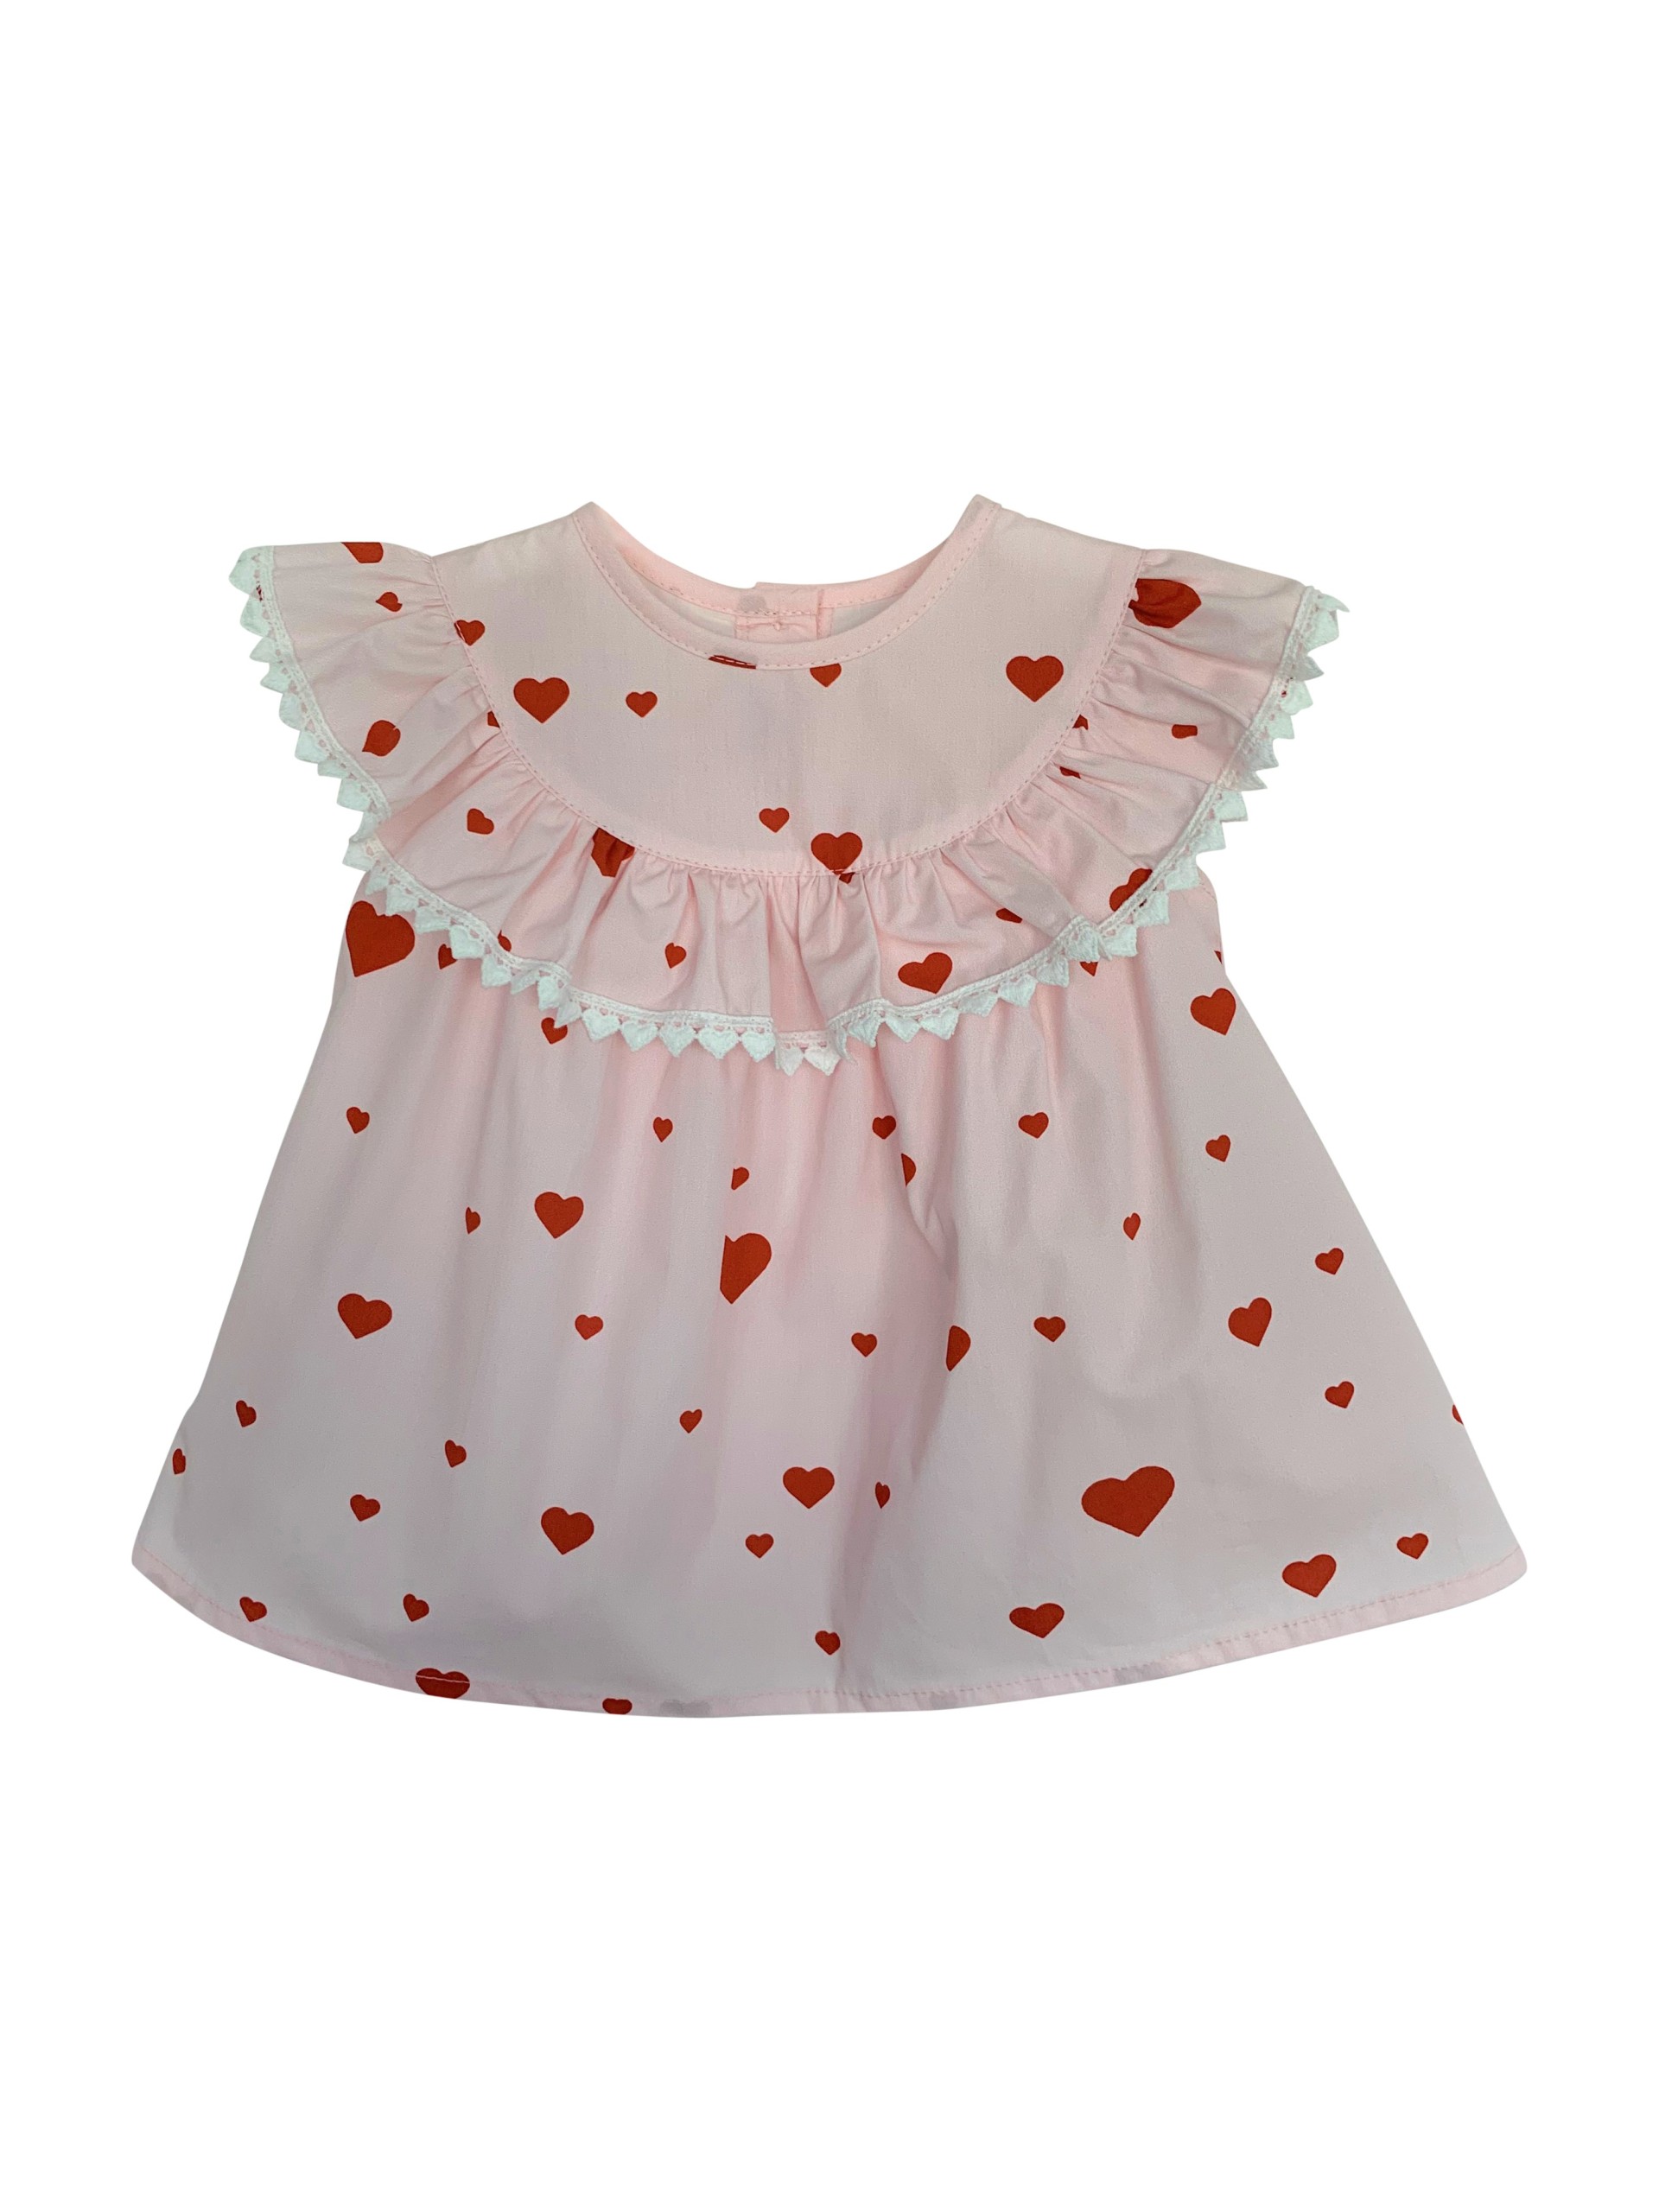 Pink with red hearts heart lace blouse